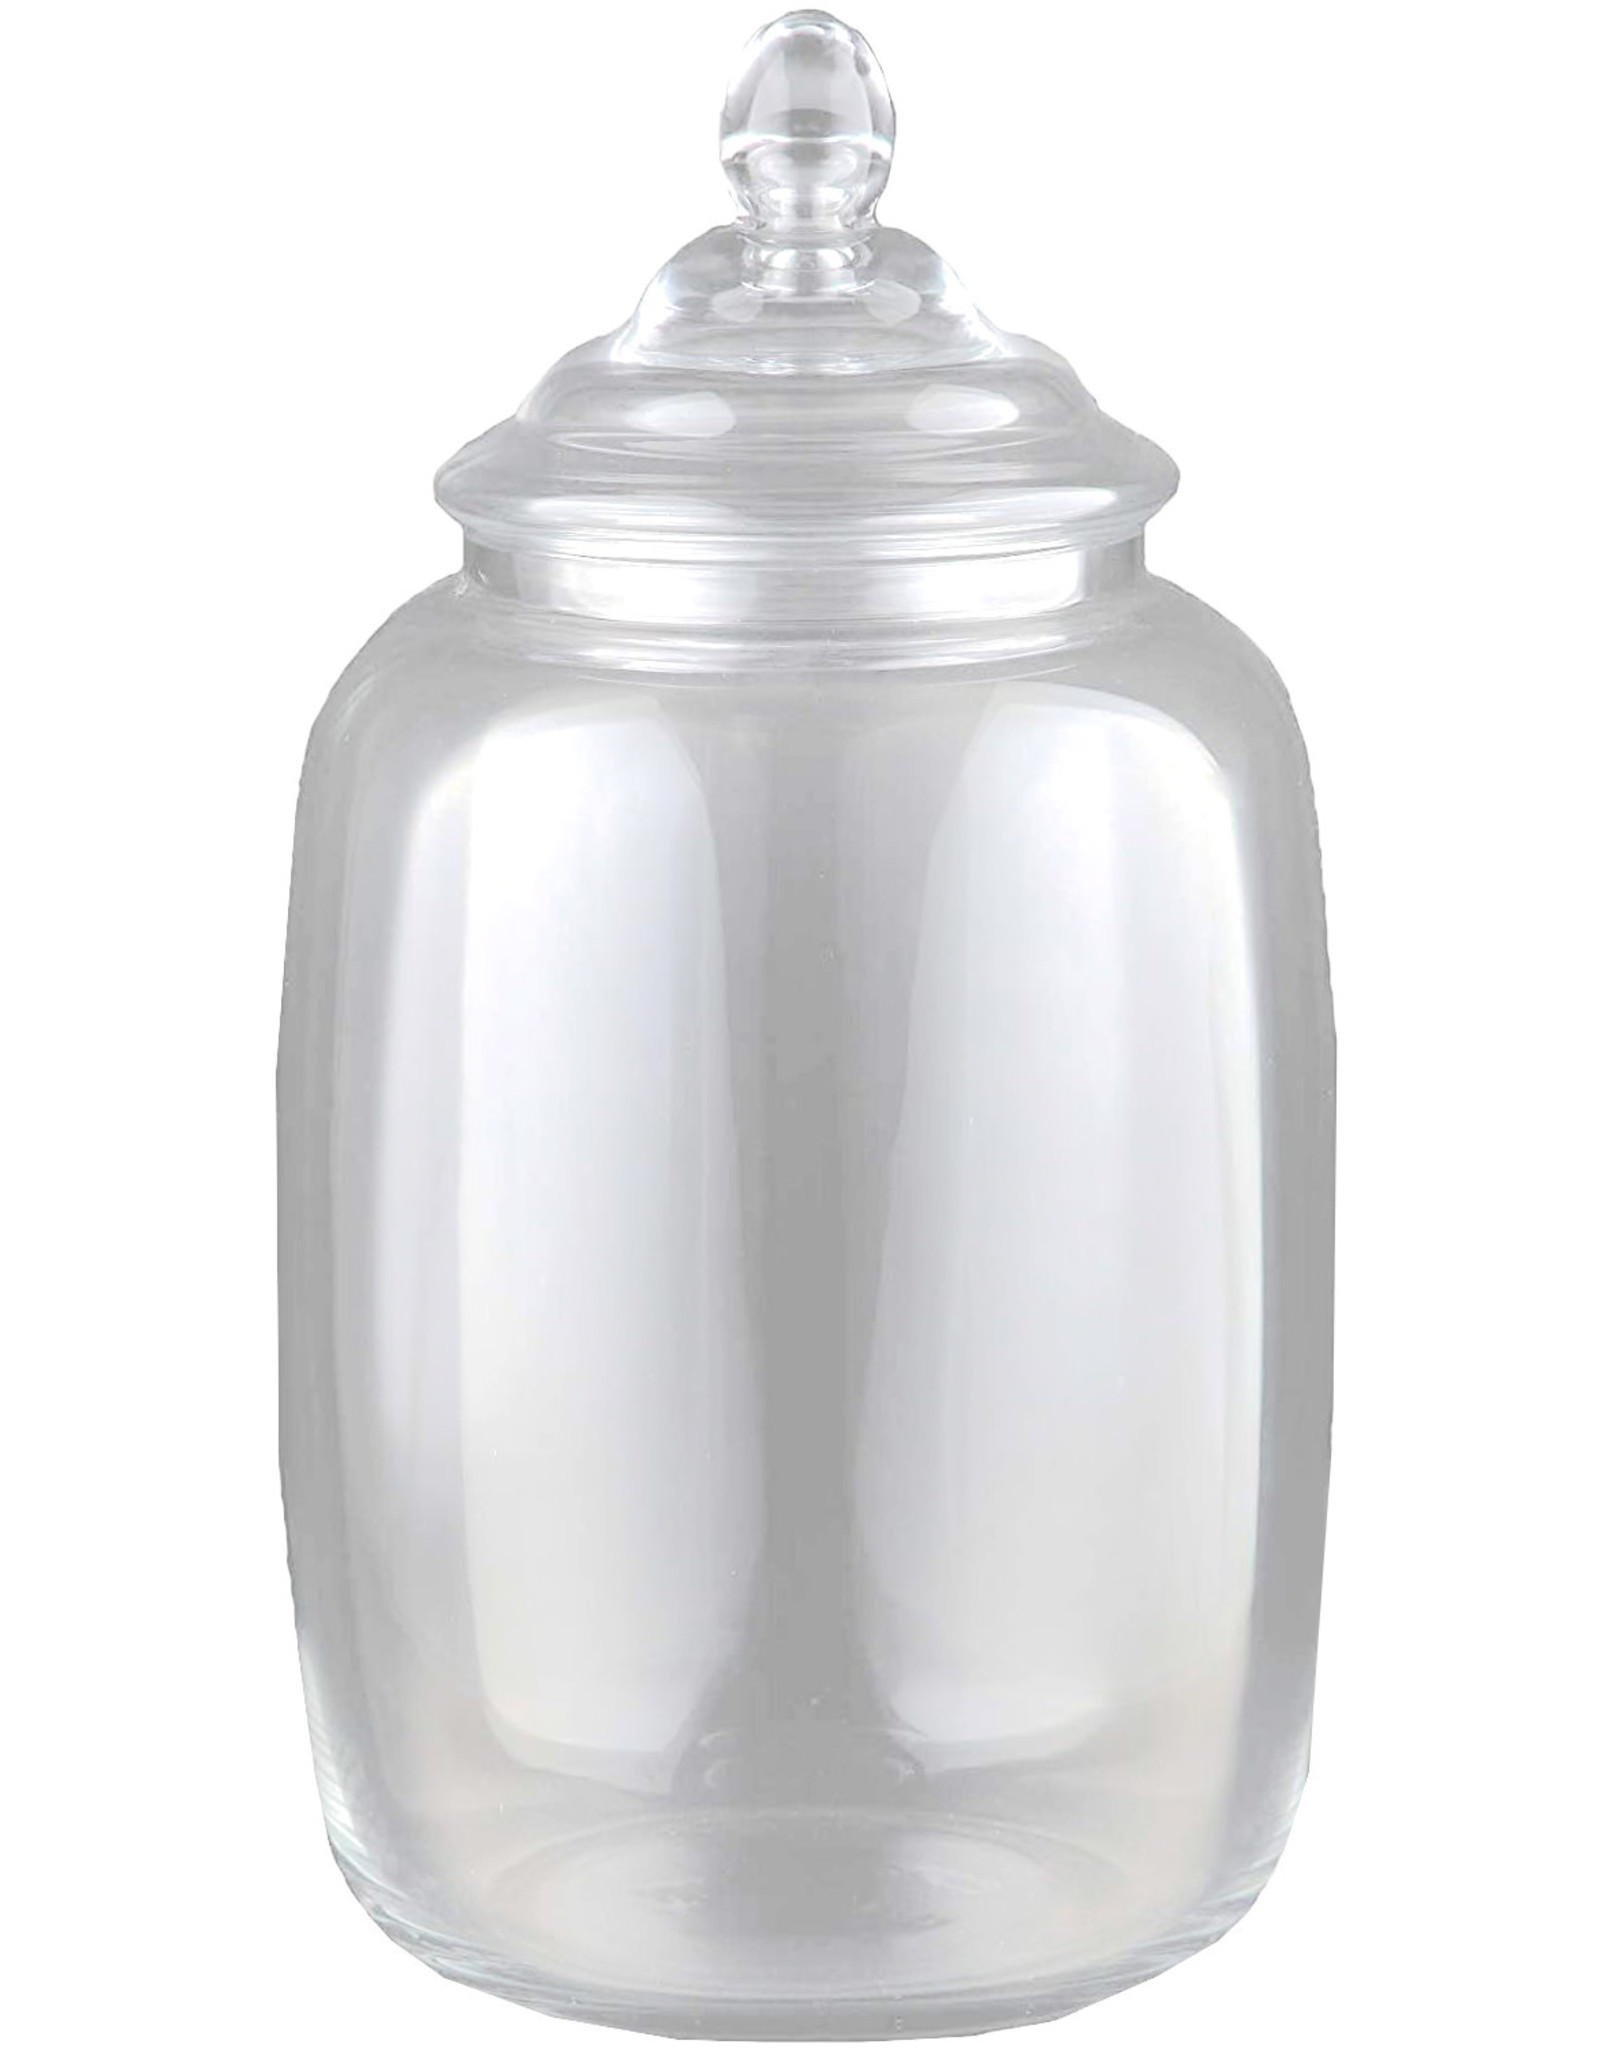 DIGS-N-GIFTS Apothecary Glass Jar W Lid 10Dx17.5H Inch Clear